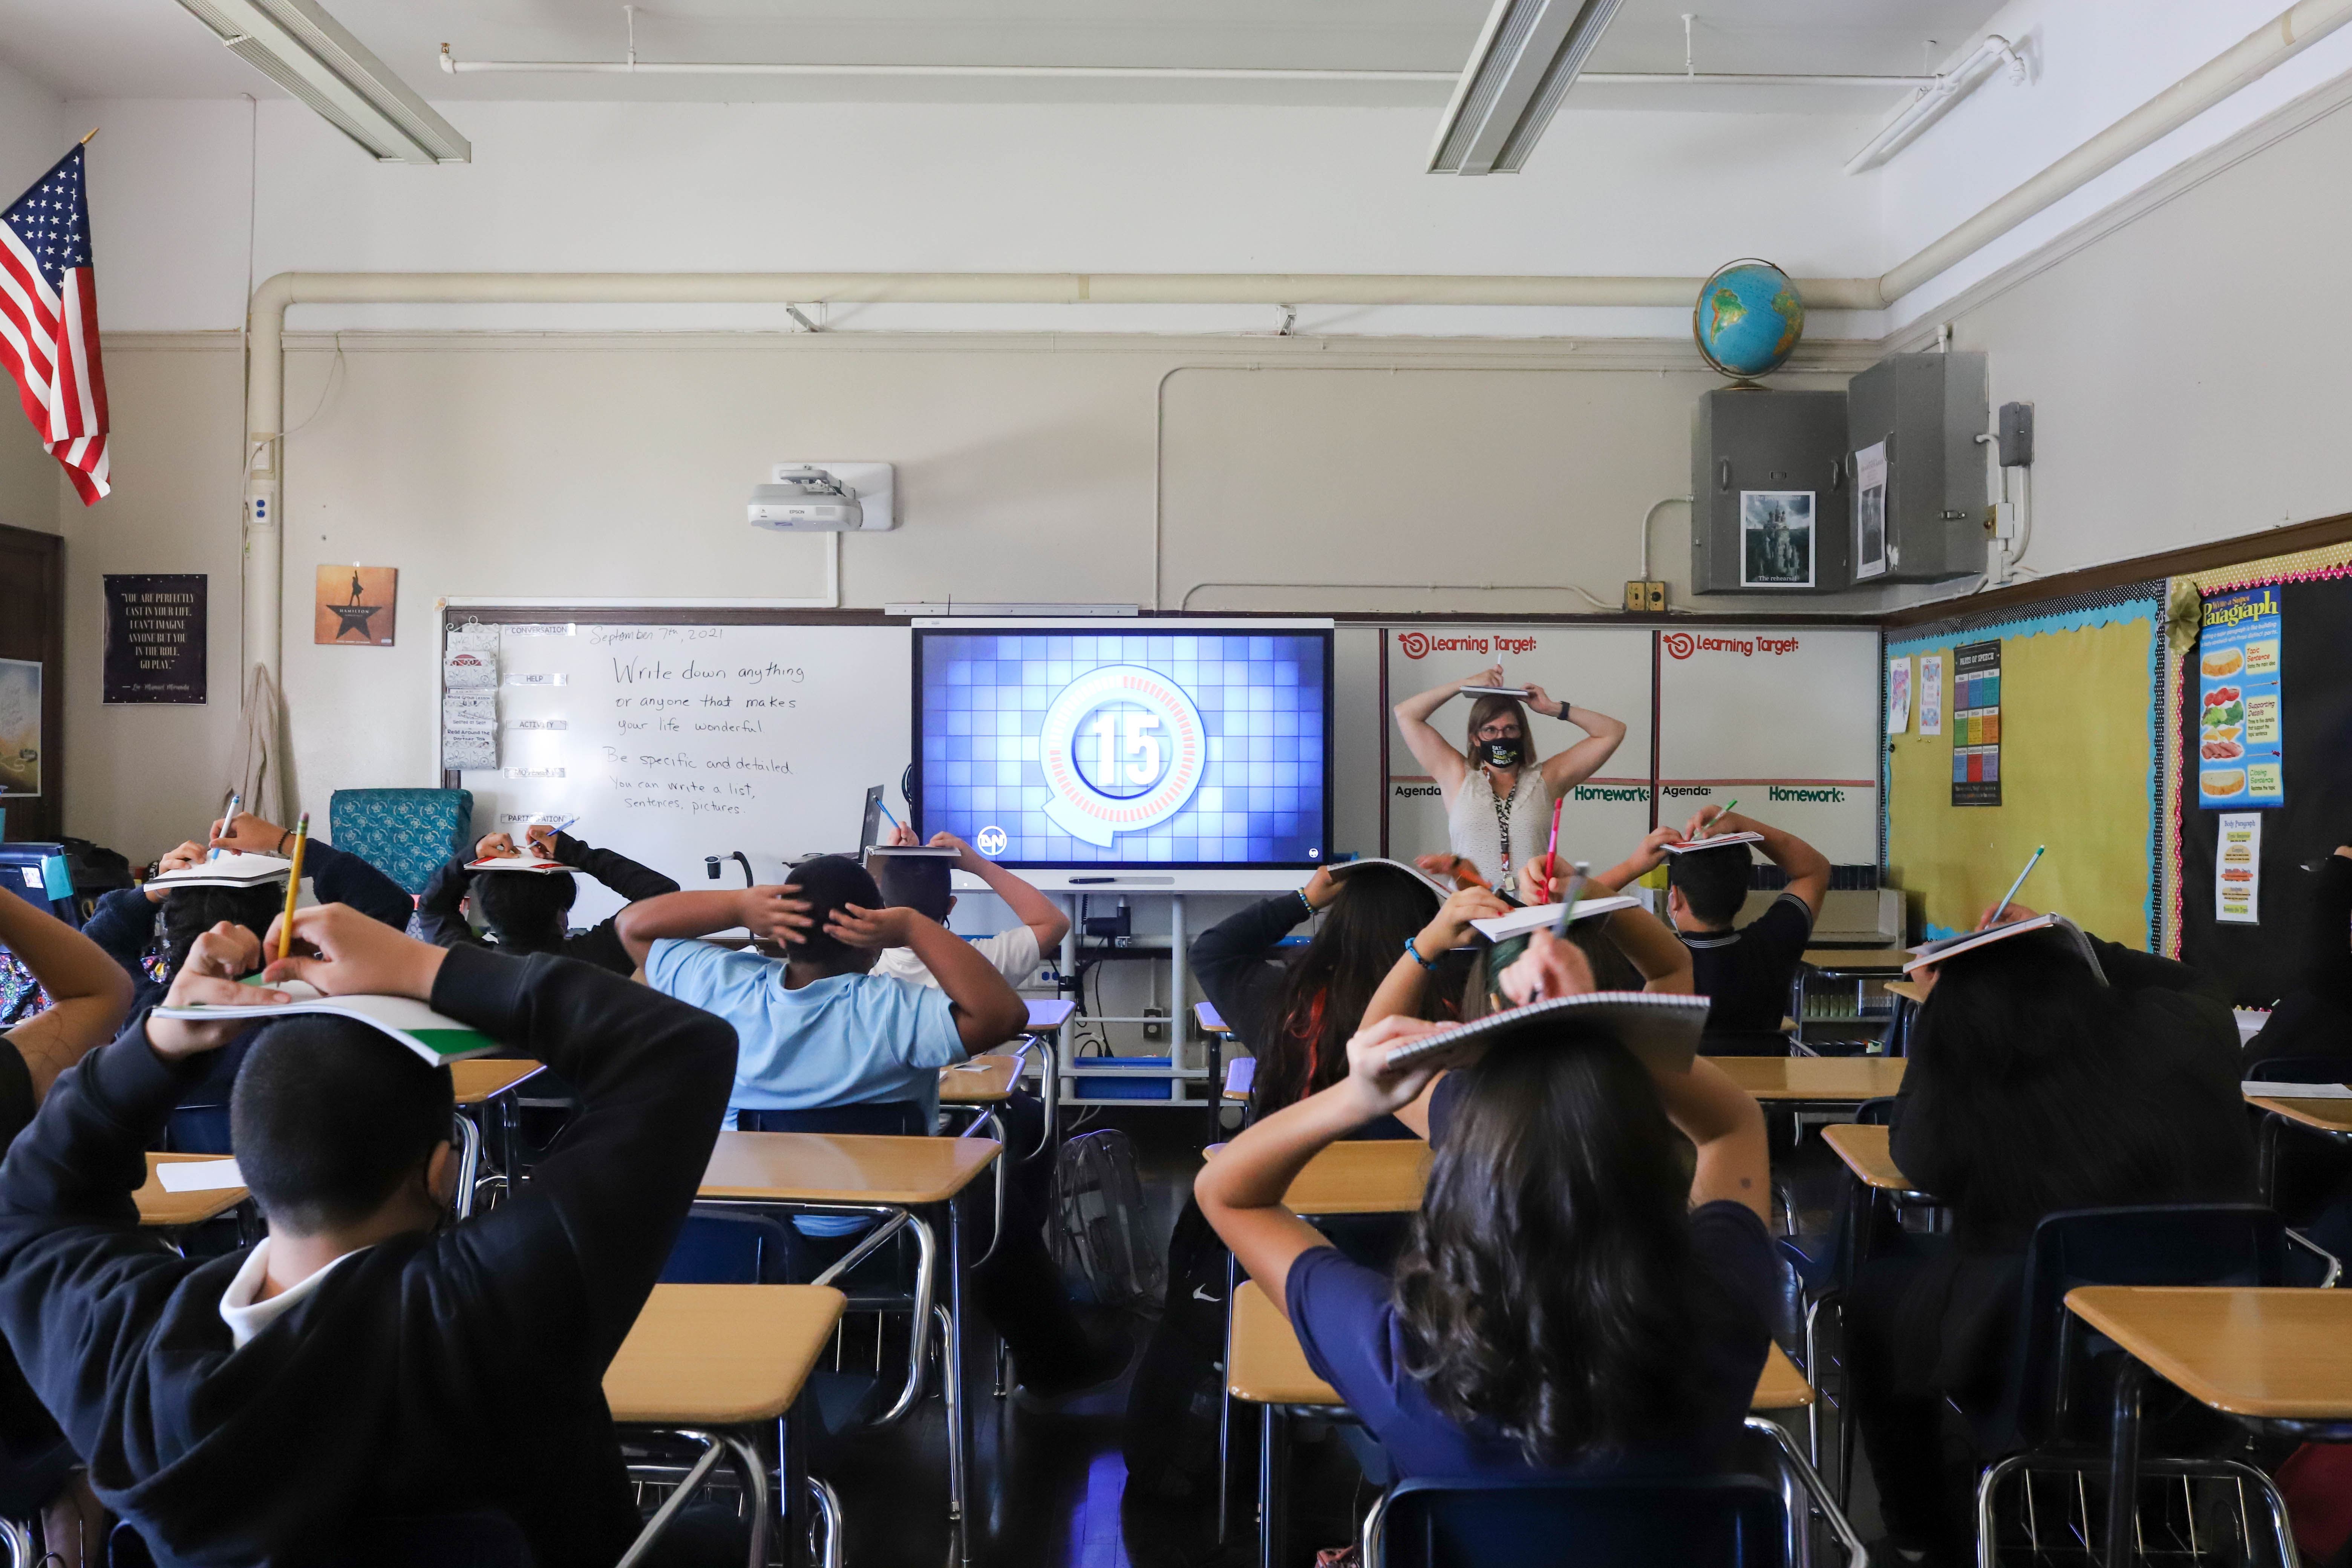 Students and their teacher balance their notebooks on their heads during class on the first day of school.